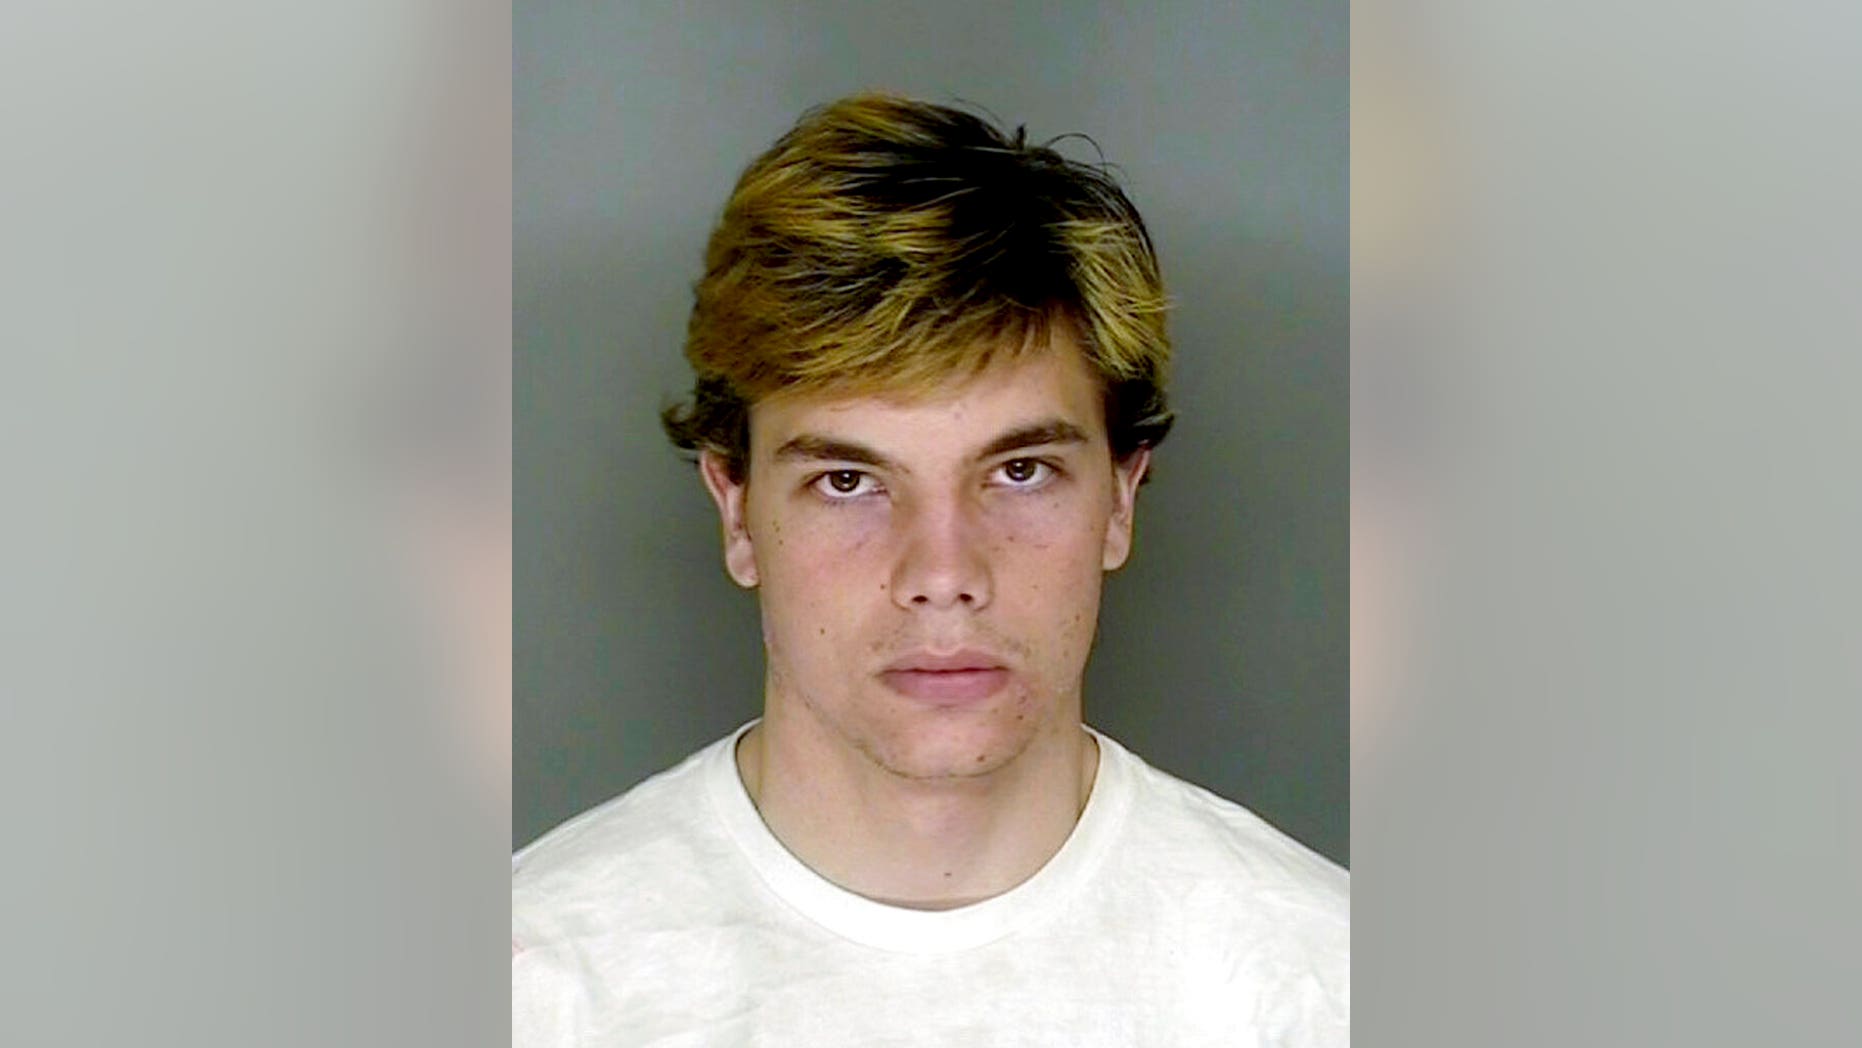 Collin Howard, 18, faces crime charges for allegedly creating an iPhone app that he dubbed the 